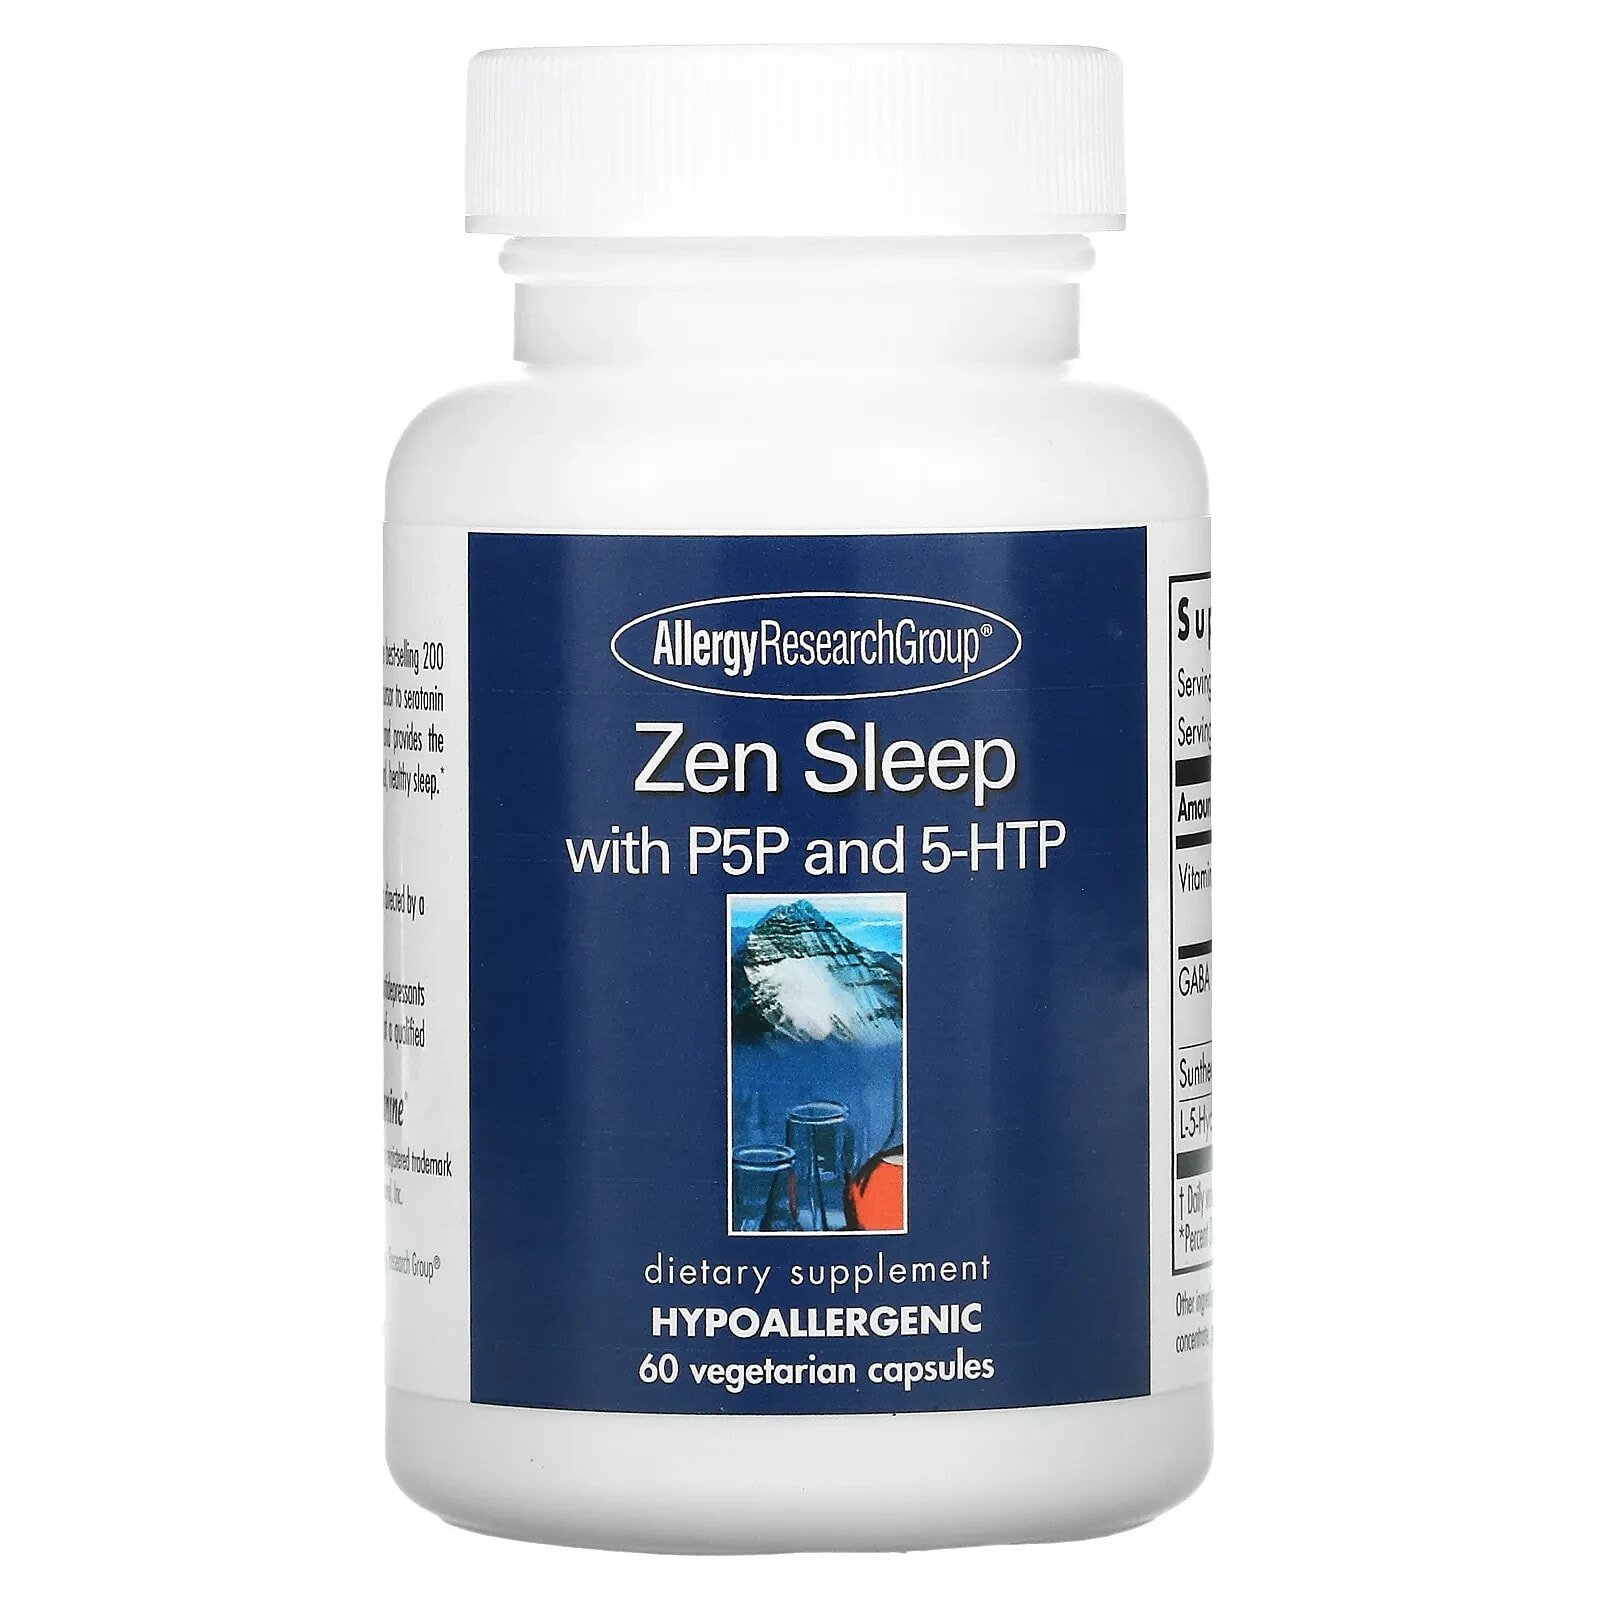 Allergy Research Group, Zen Sleep with P5P and 5-HTP, 60 Vegetarian Capsules